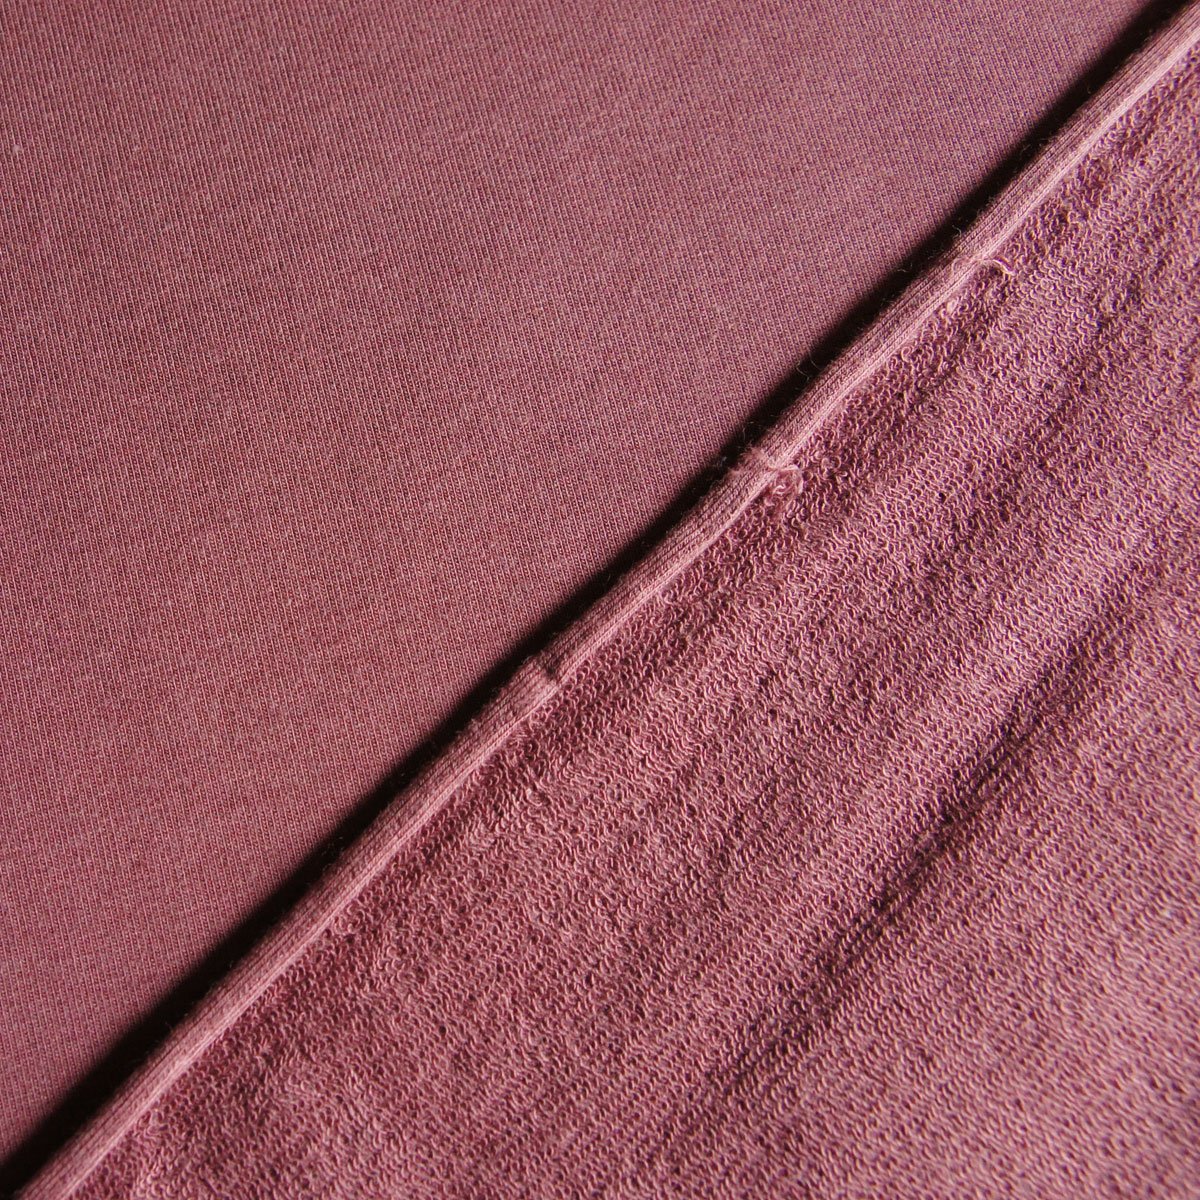 Tencel Organic Cotton Spandex French Terry Fabric - Rose Brown - Knit - Earth Indigo